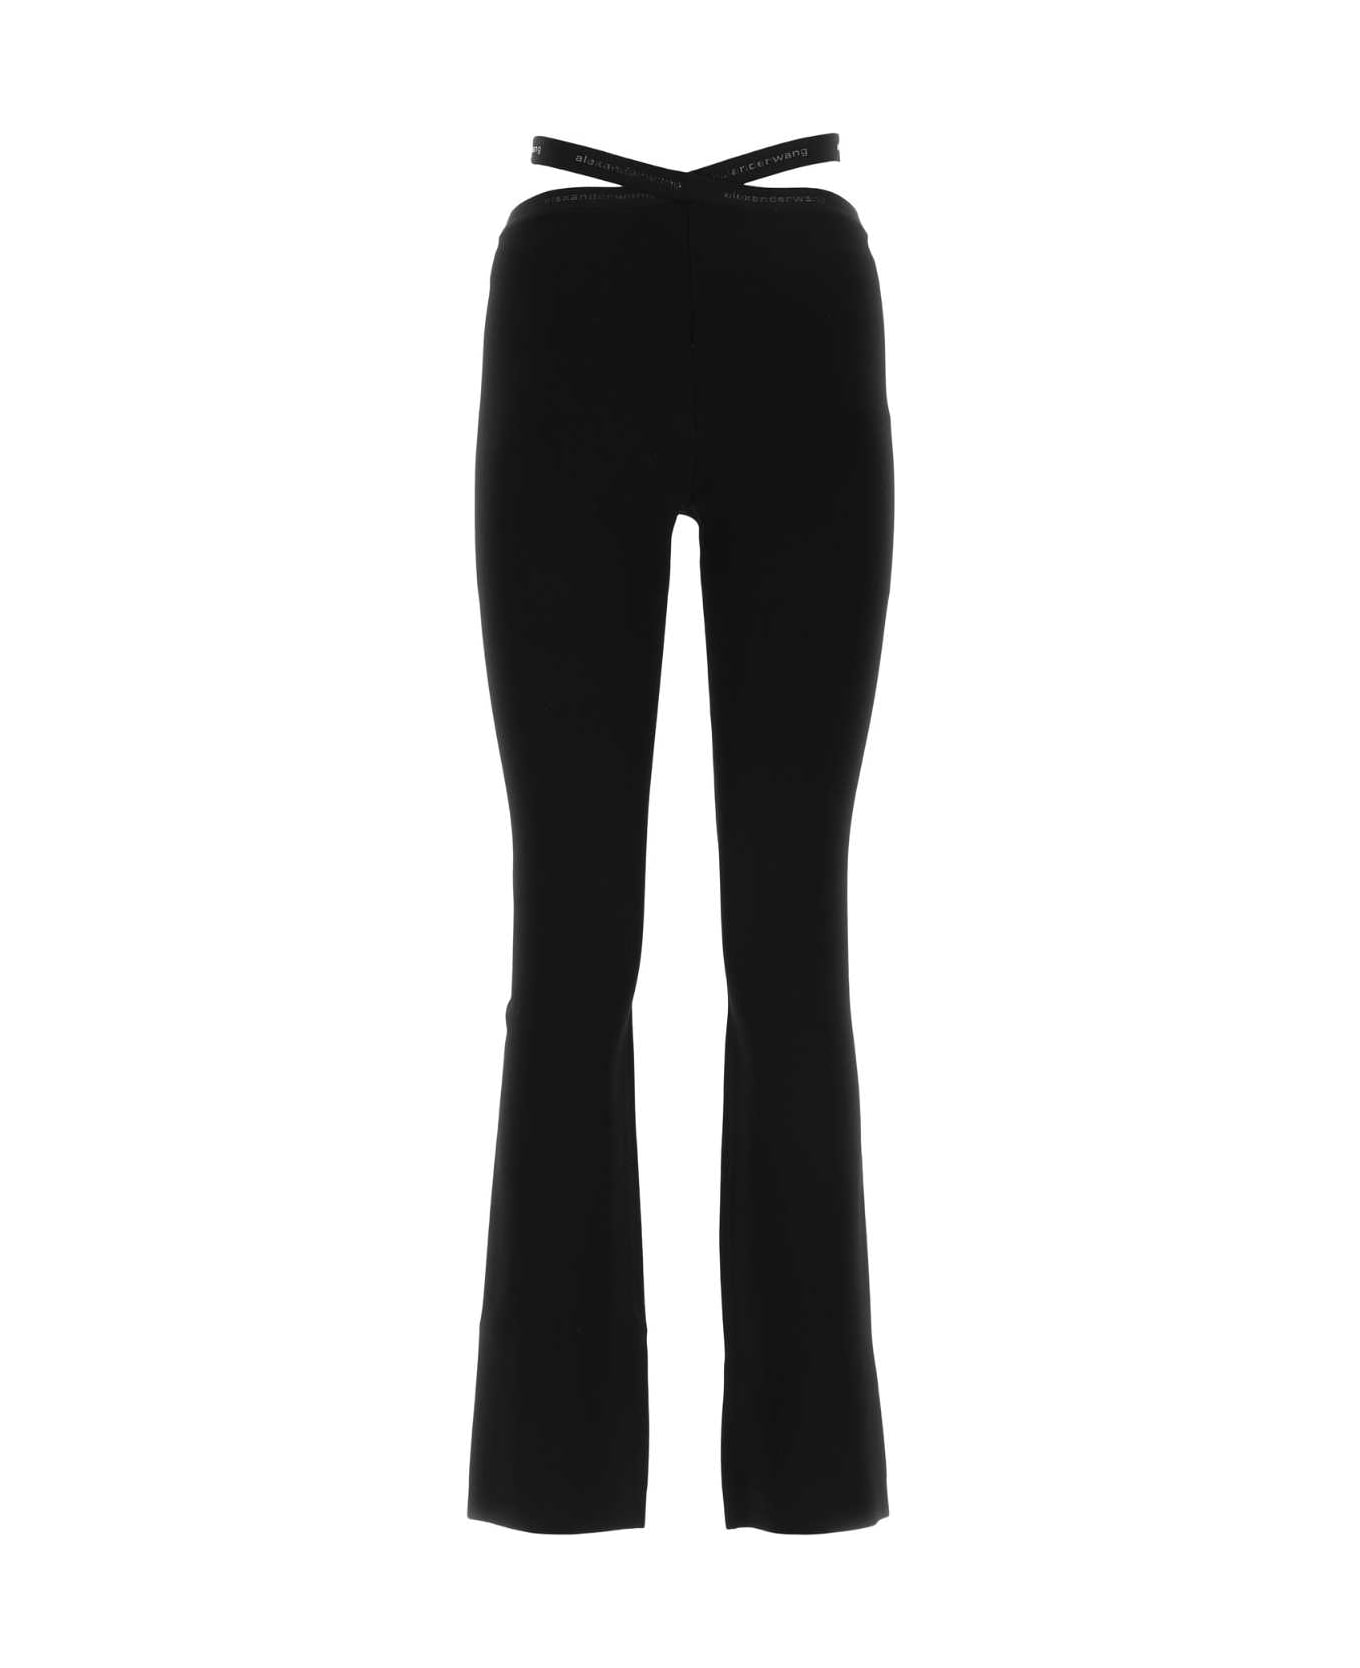 T by Alexander Wang Black Stretch Viscose Blend Pant - 001 ボトムス